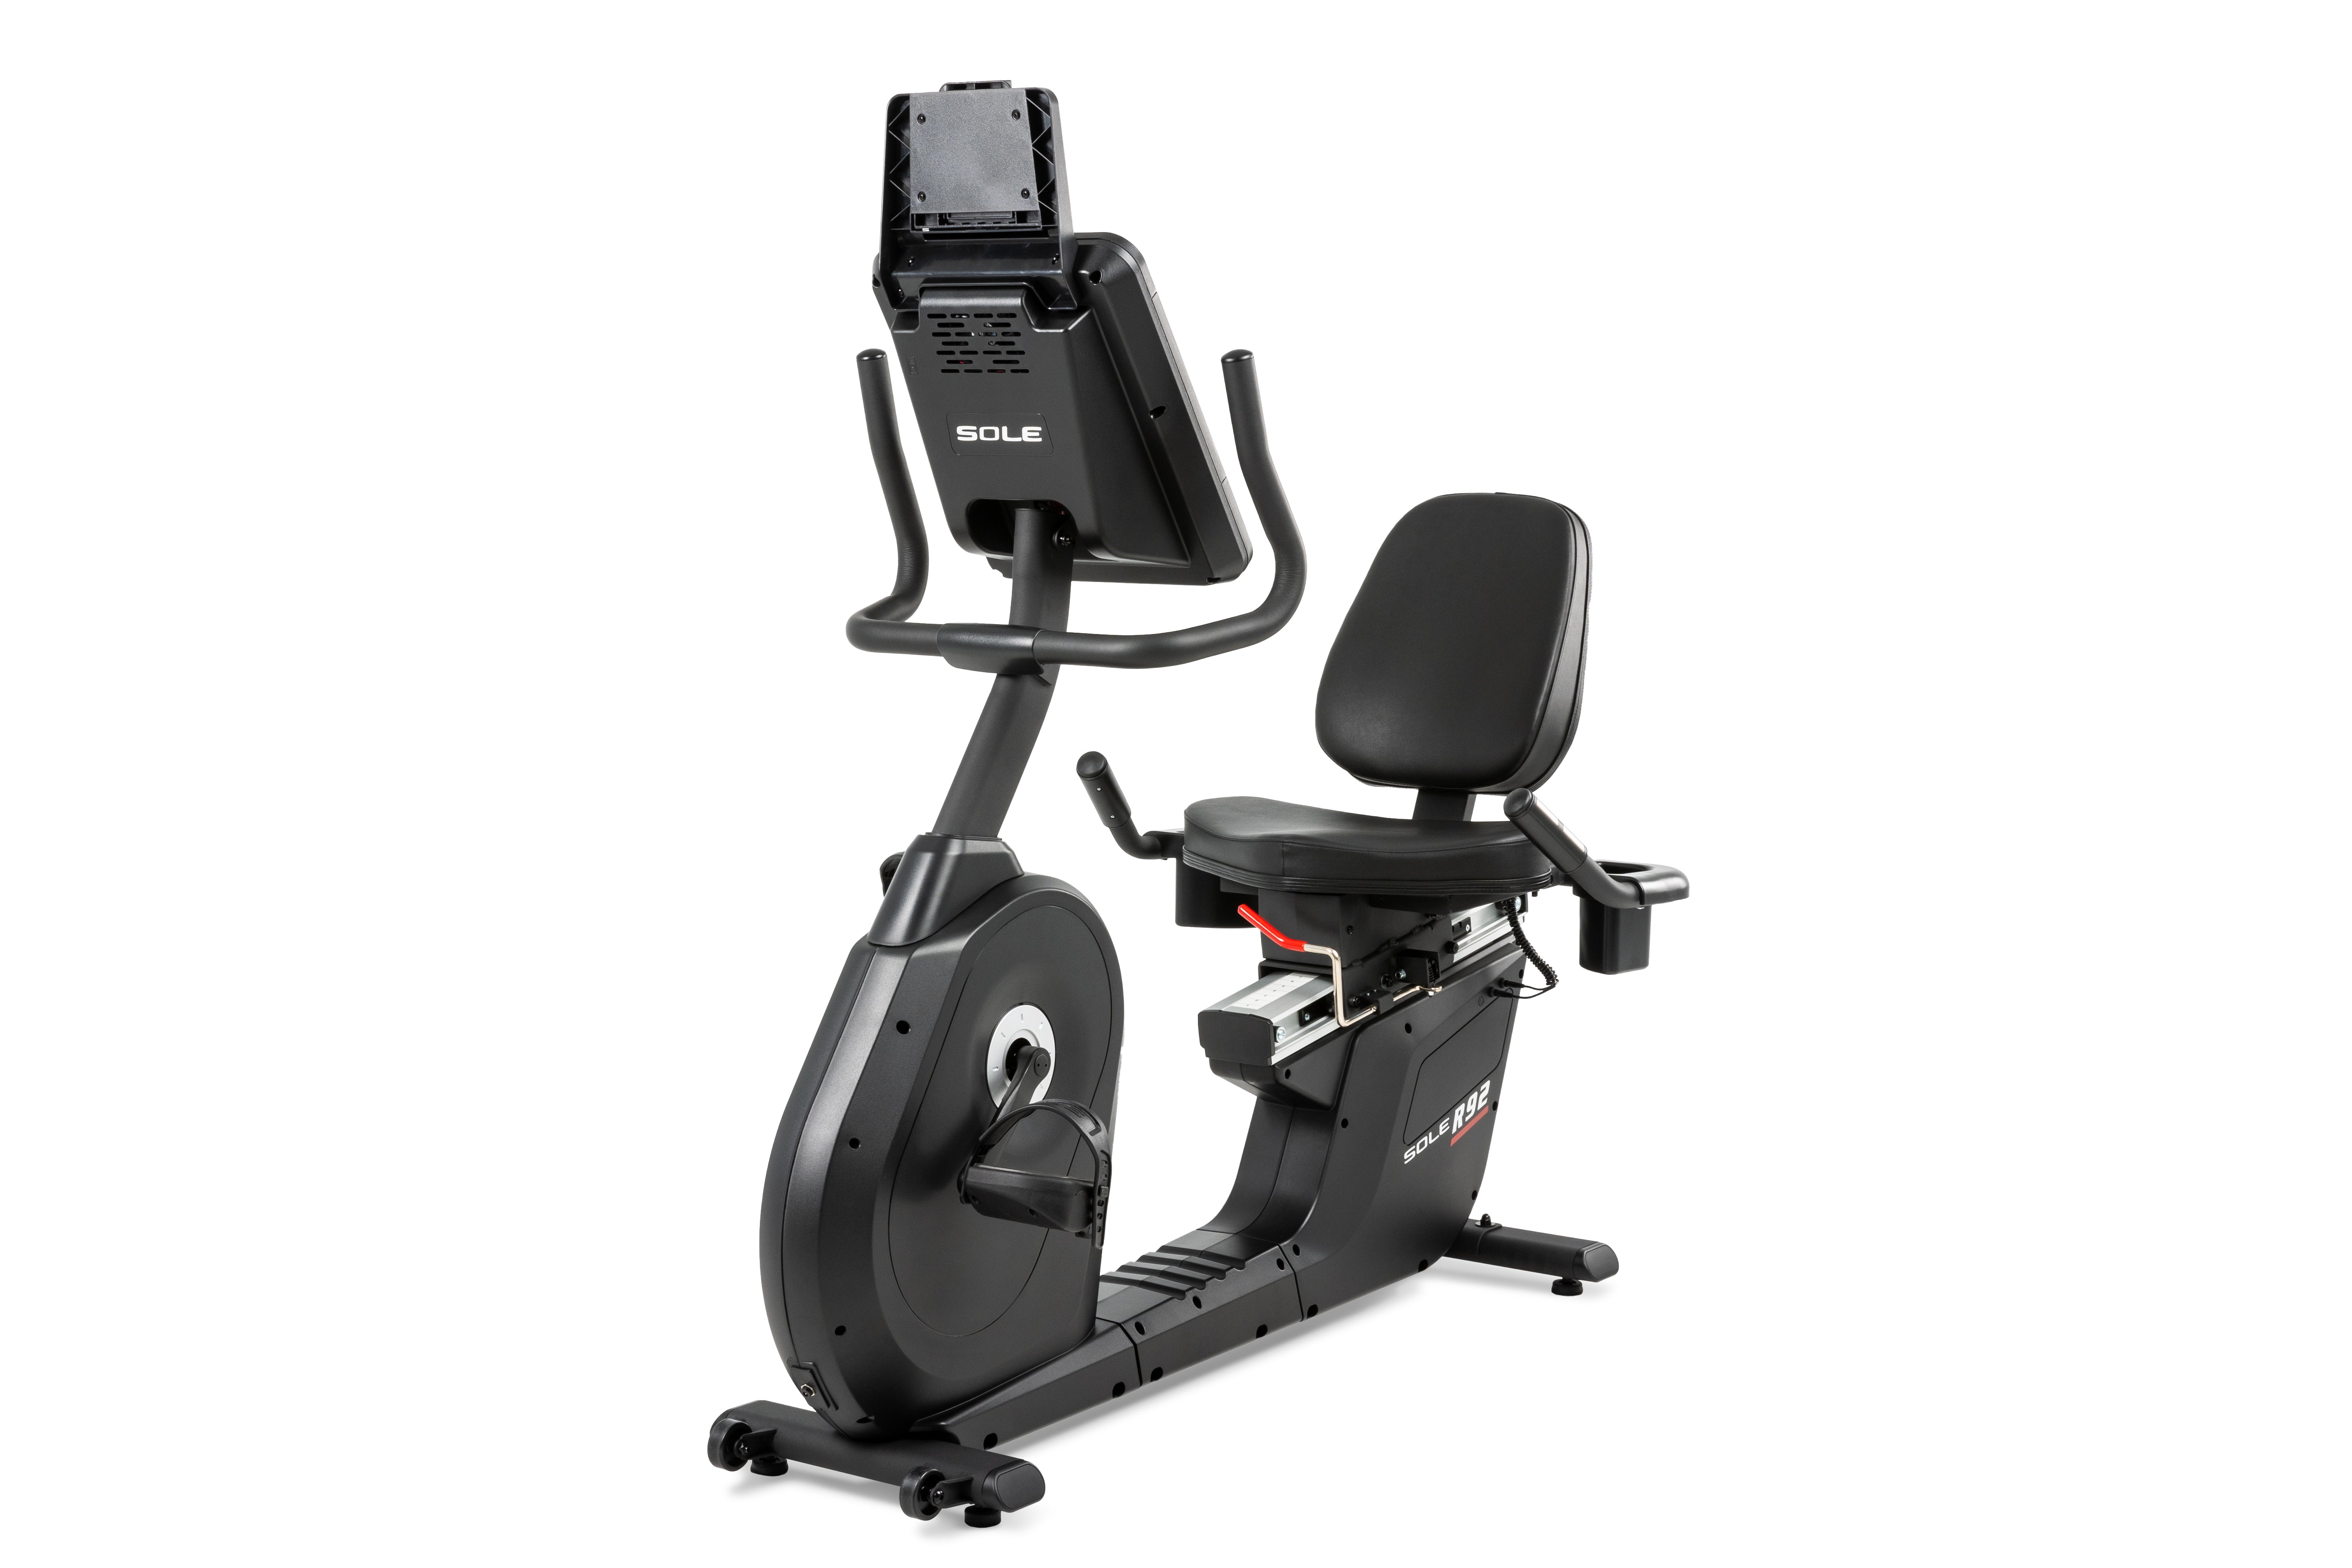 SOLE R92 Exercise Bike